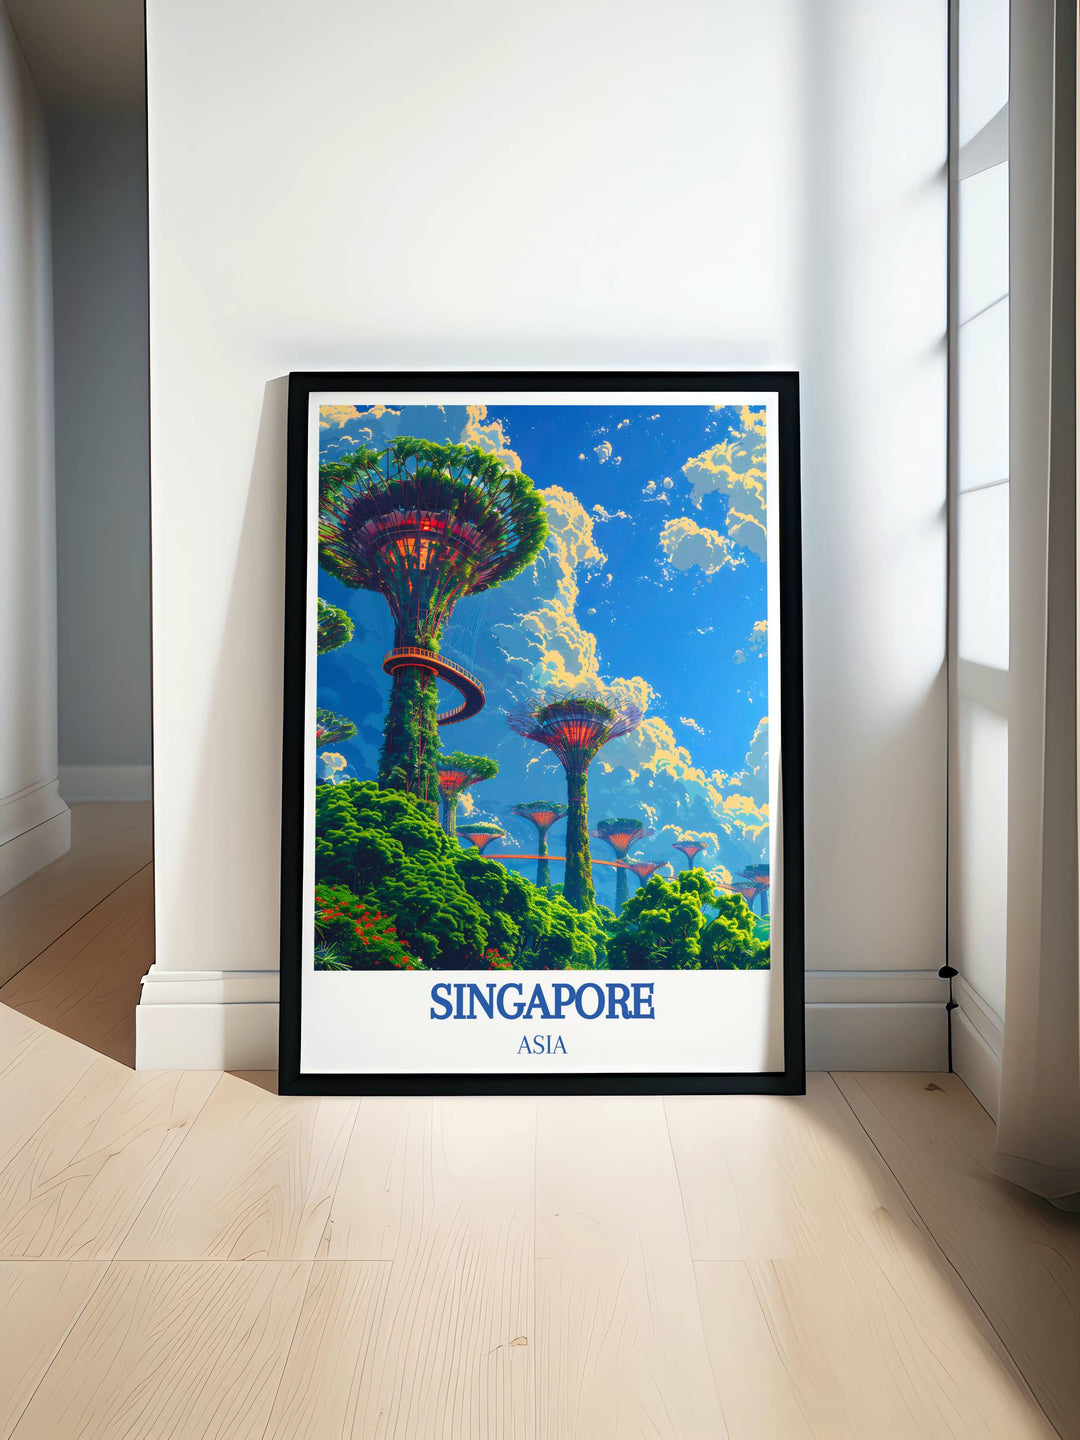 Singapore Fine Art Prints capturing the iconic Supertrees and lush landscapes of Gardens by the Bay, perfect for adding urban sophistication to your home decor.